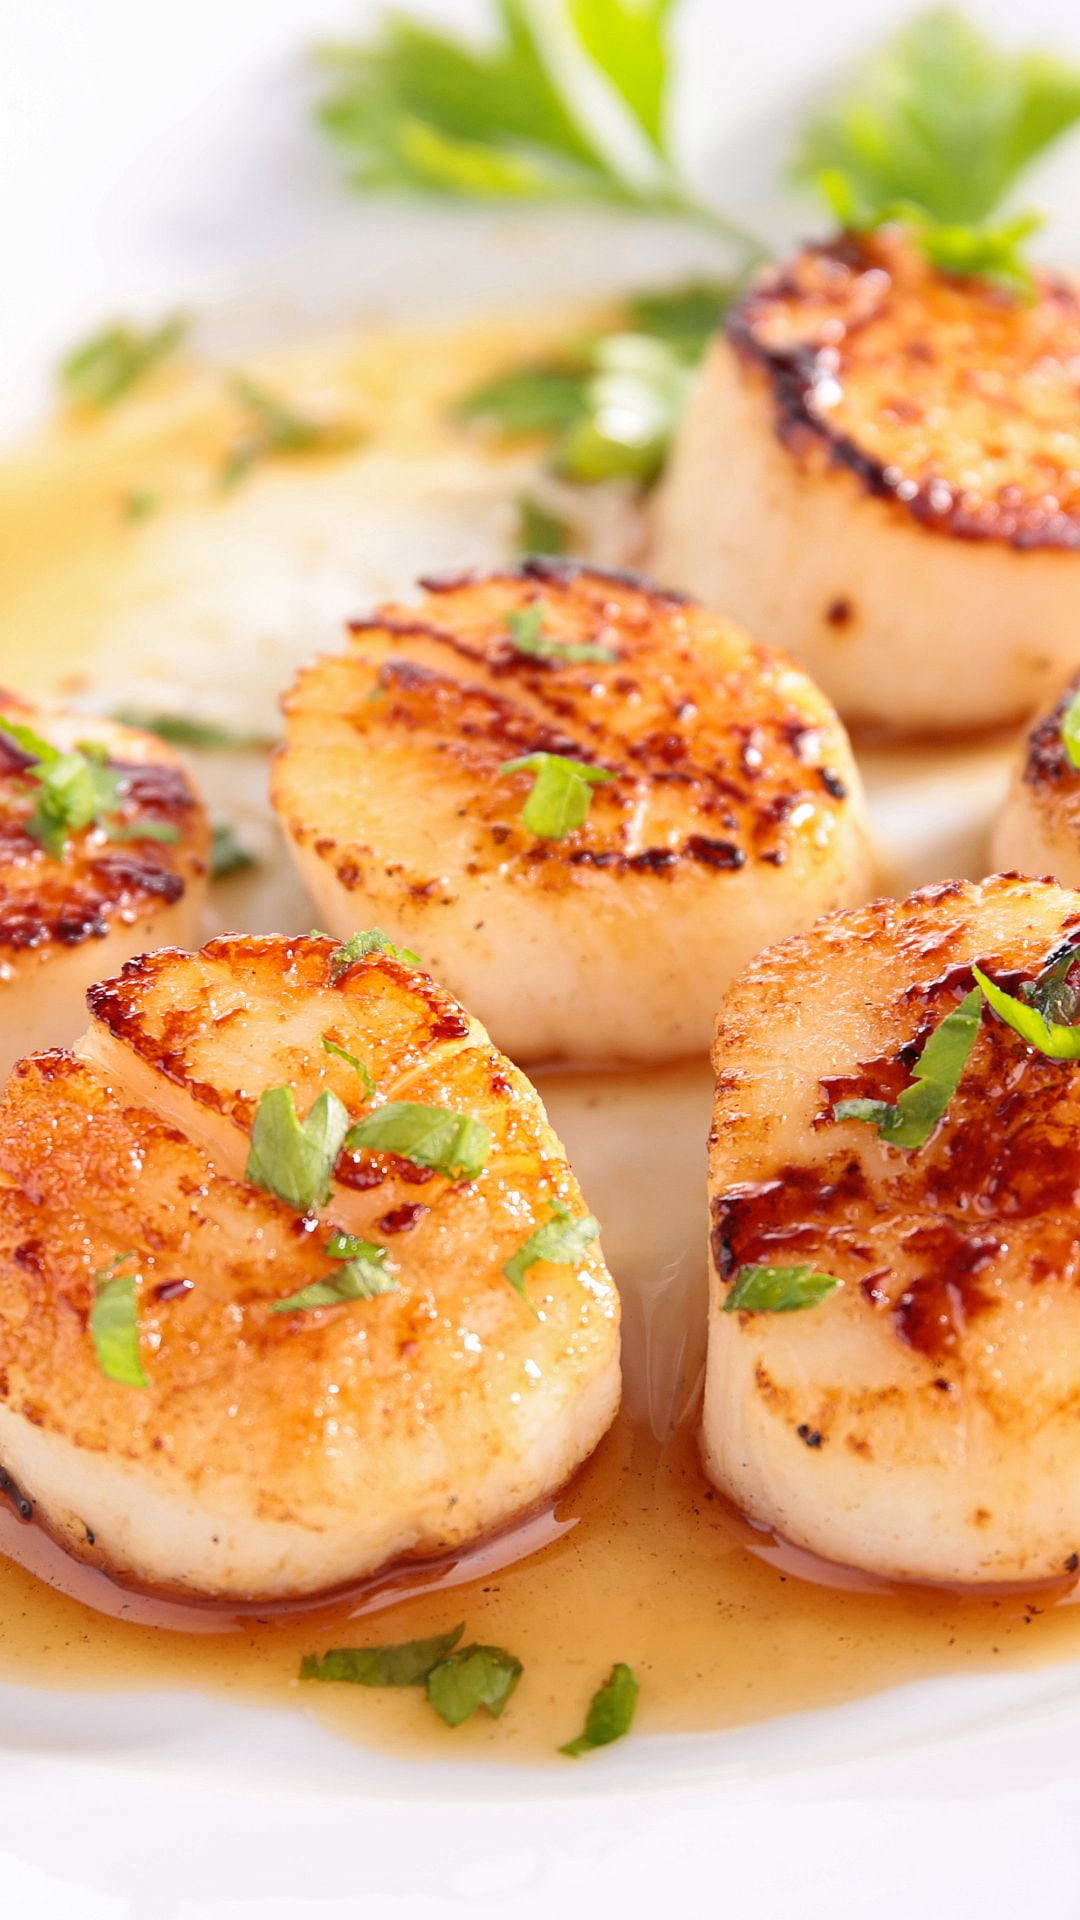 Scallops Seared With Herbs On Plate Wallpaper